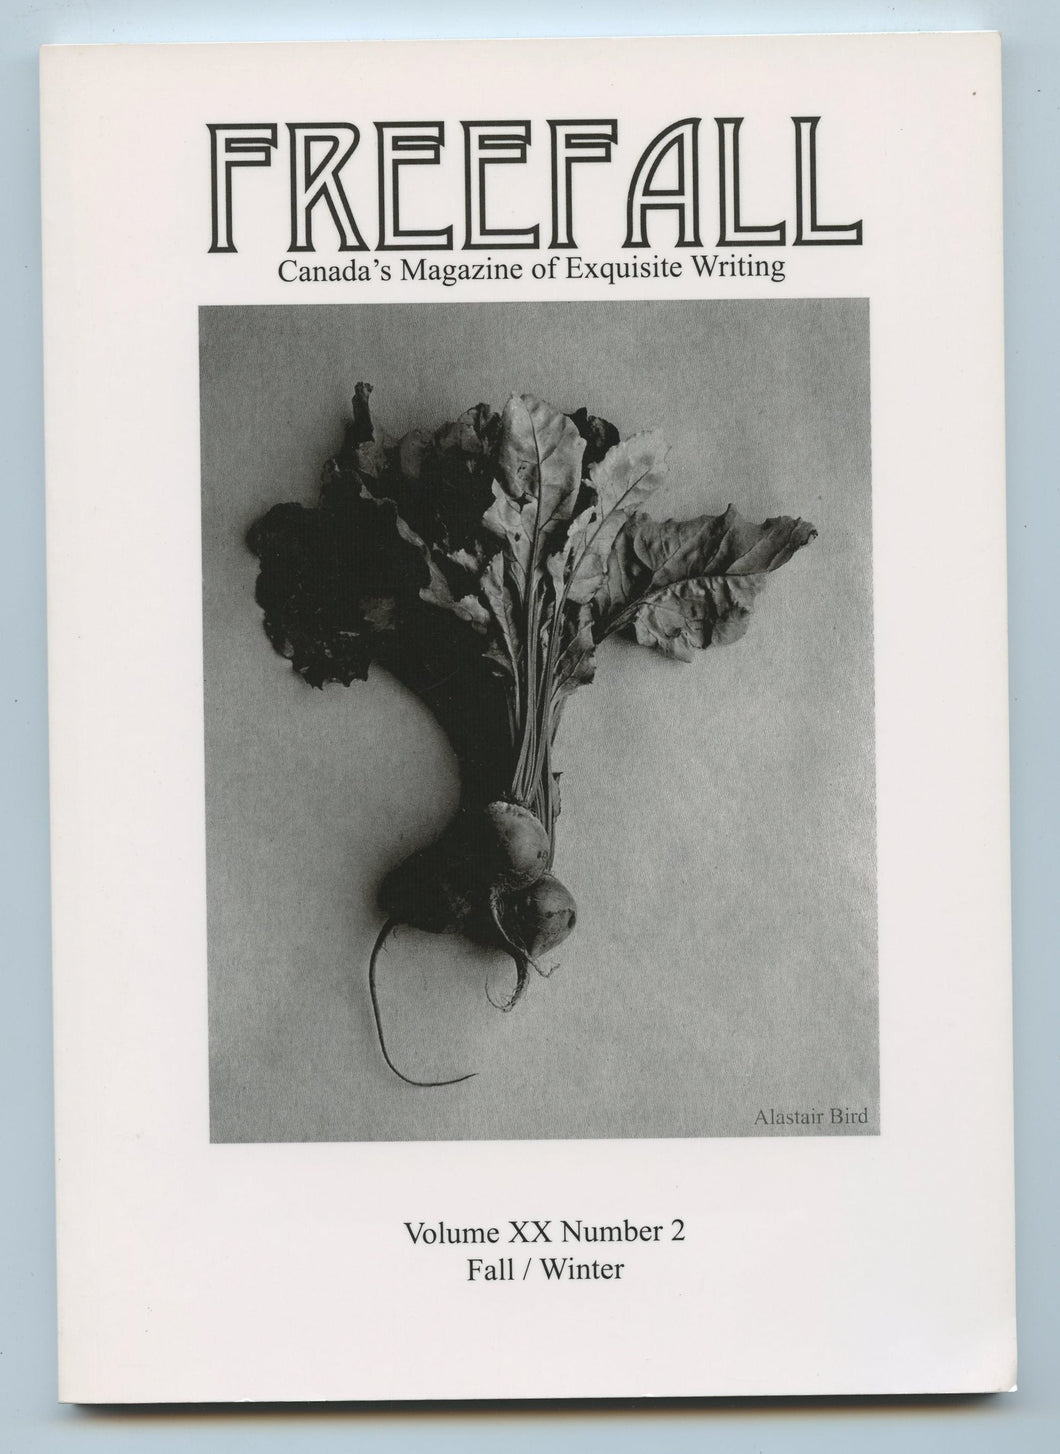 FreeFall: Canada's Magazine of Exquisite Writing, Fall/Winter 2010